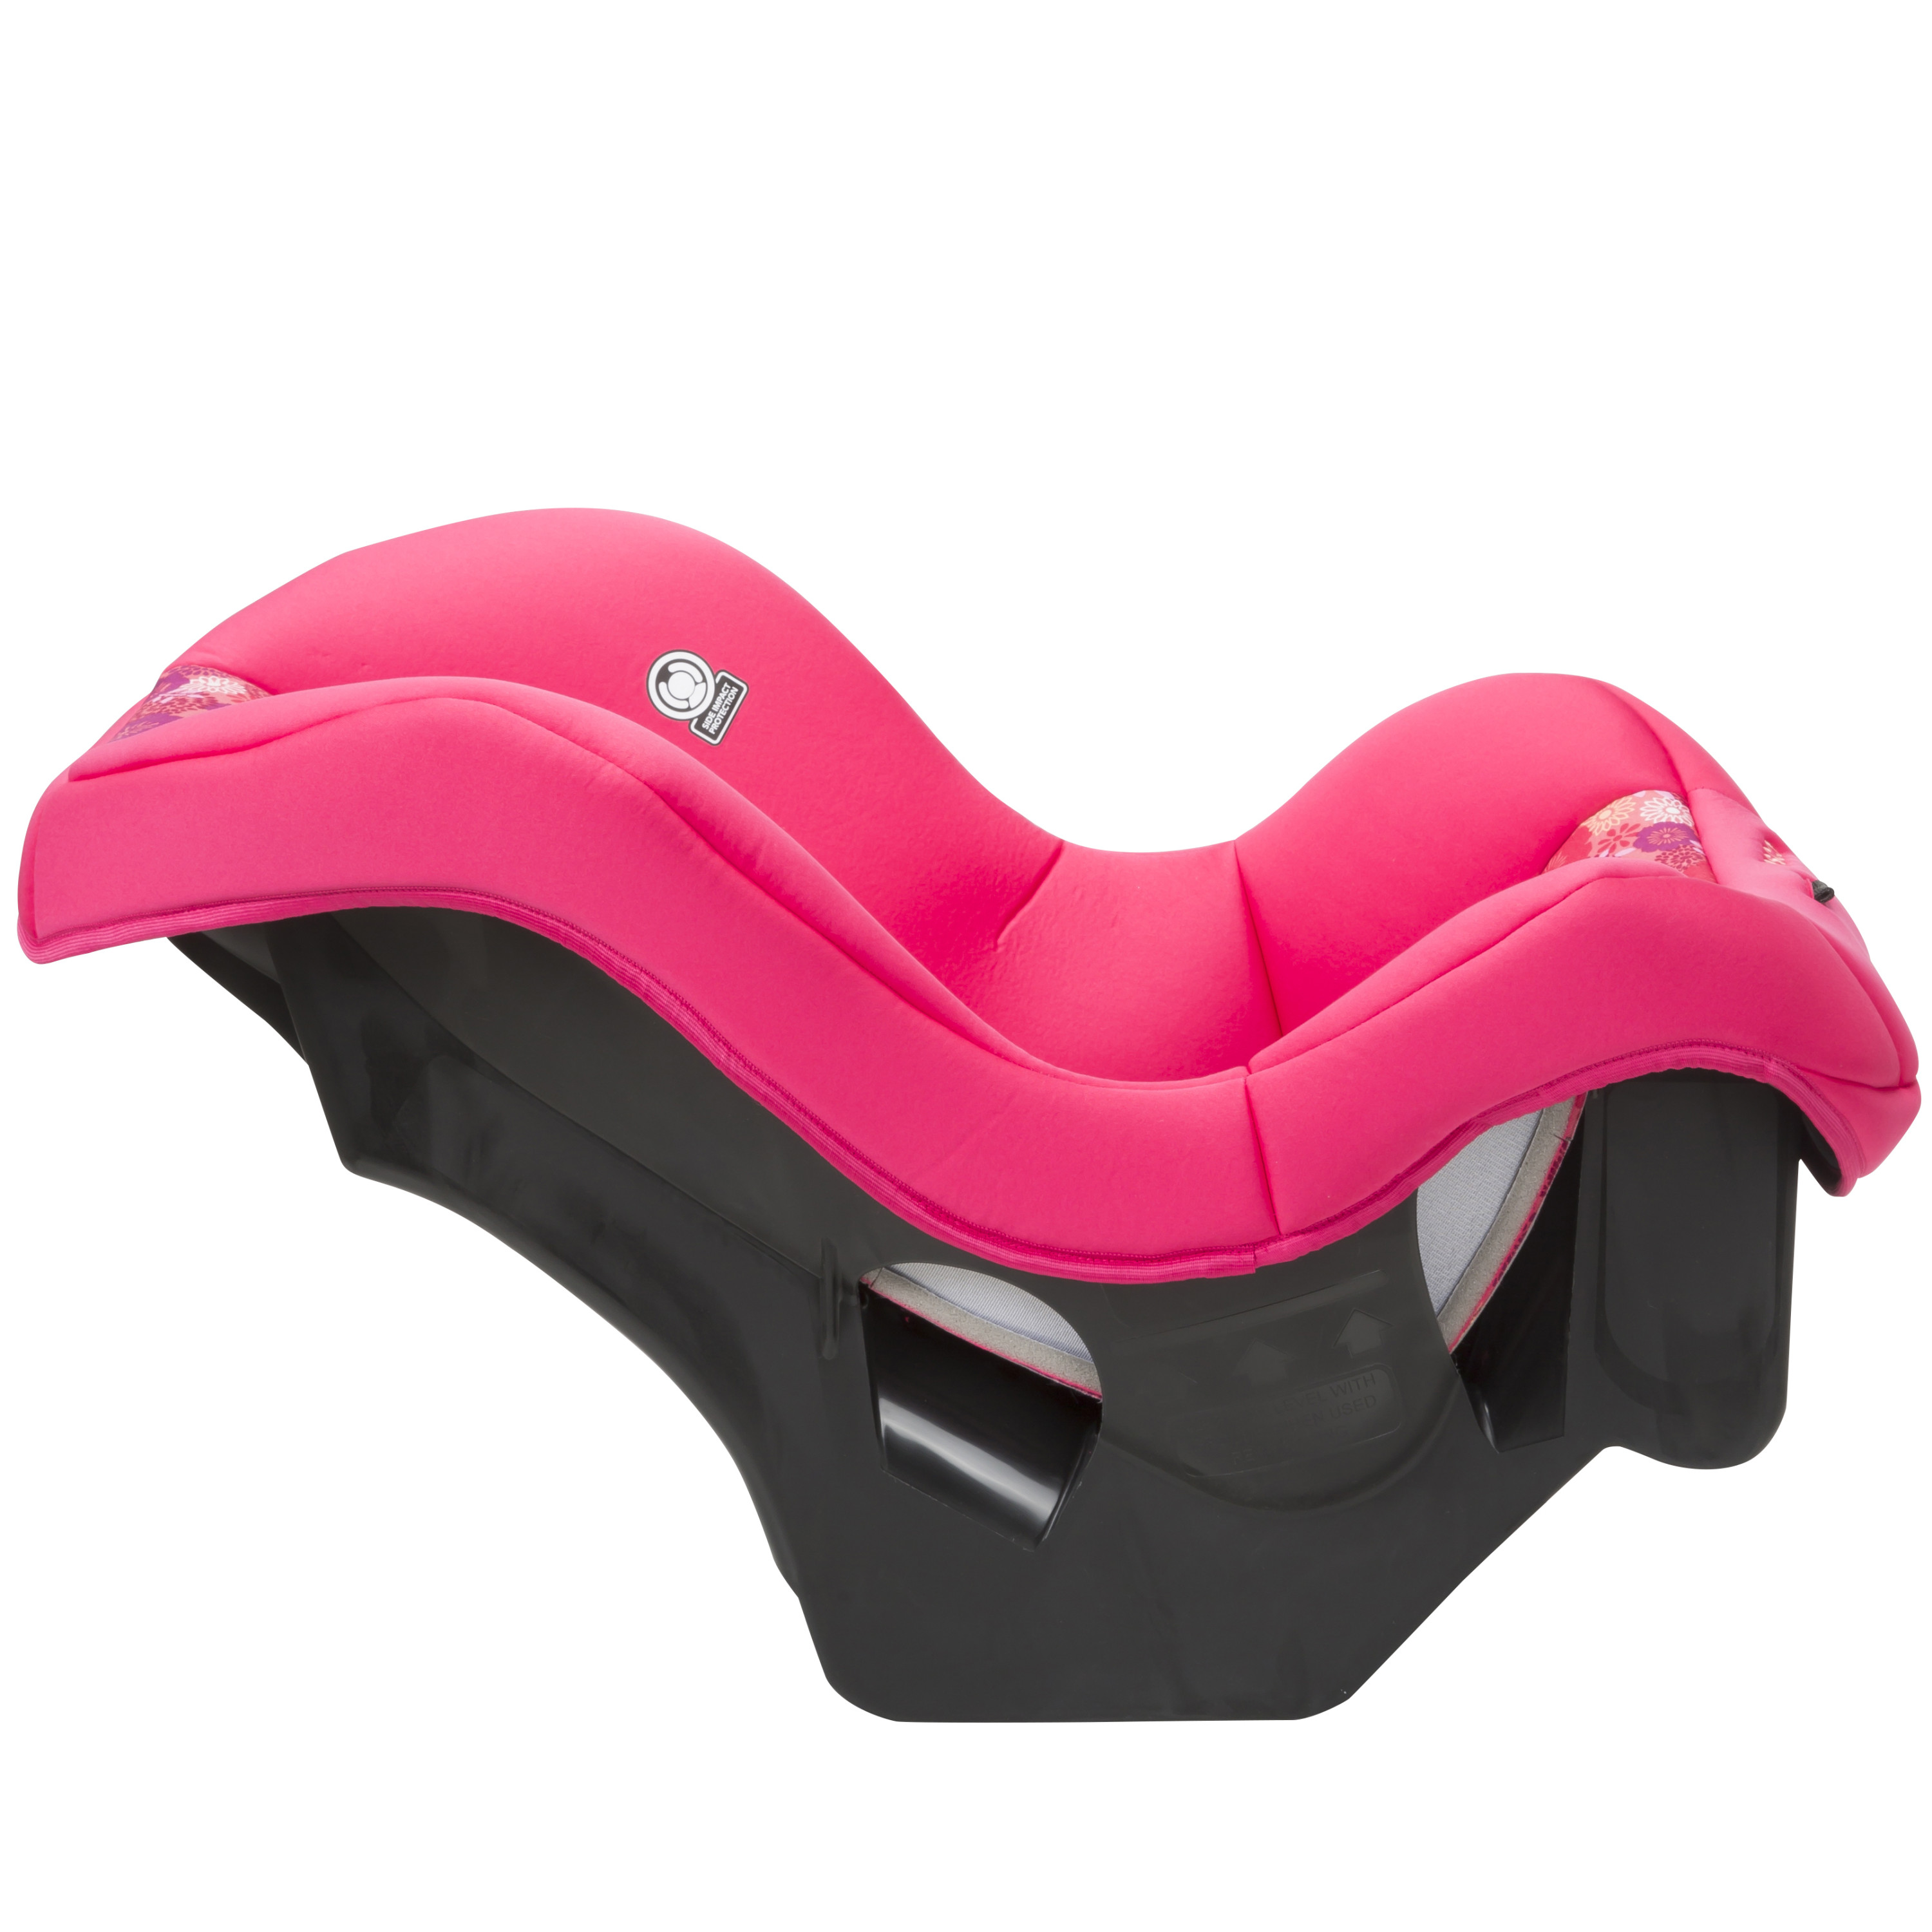 Cosco Scenera Convertible Car Seat, Floral Orchard Blossom Pink - image 8 of 13